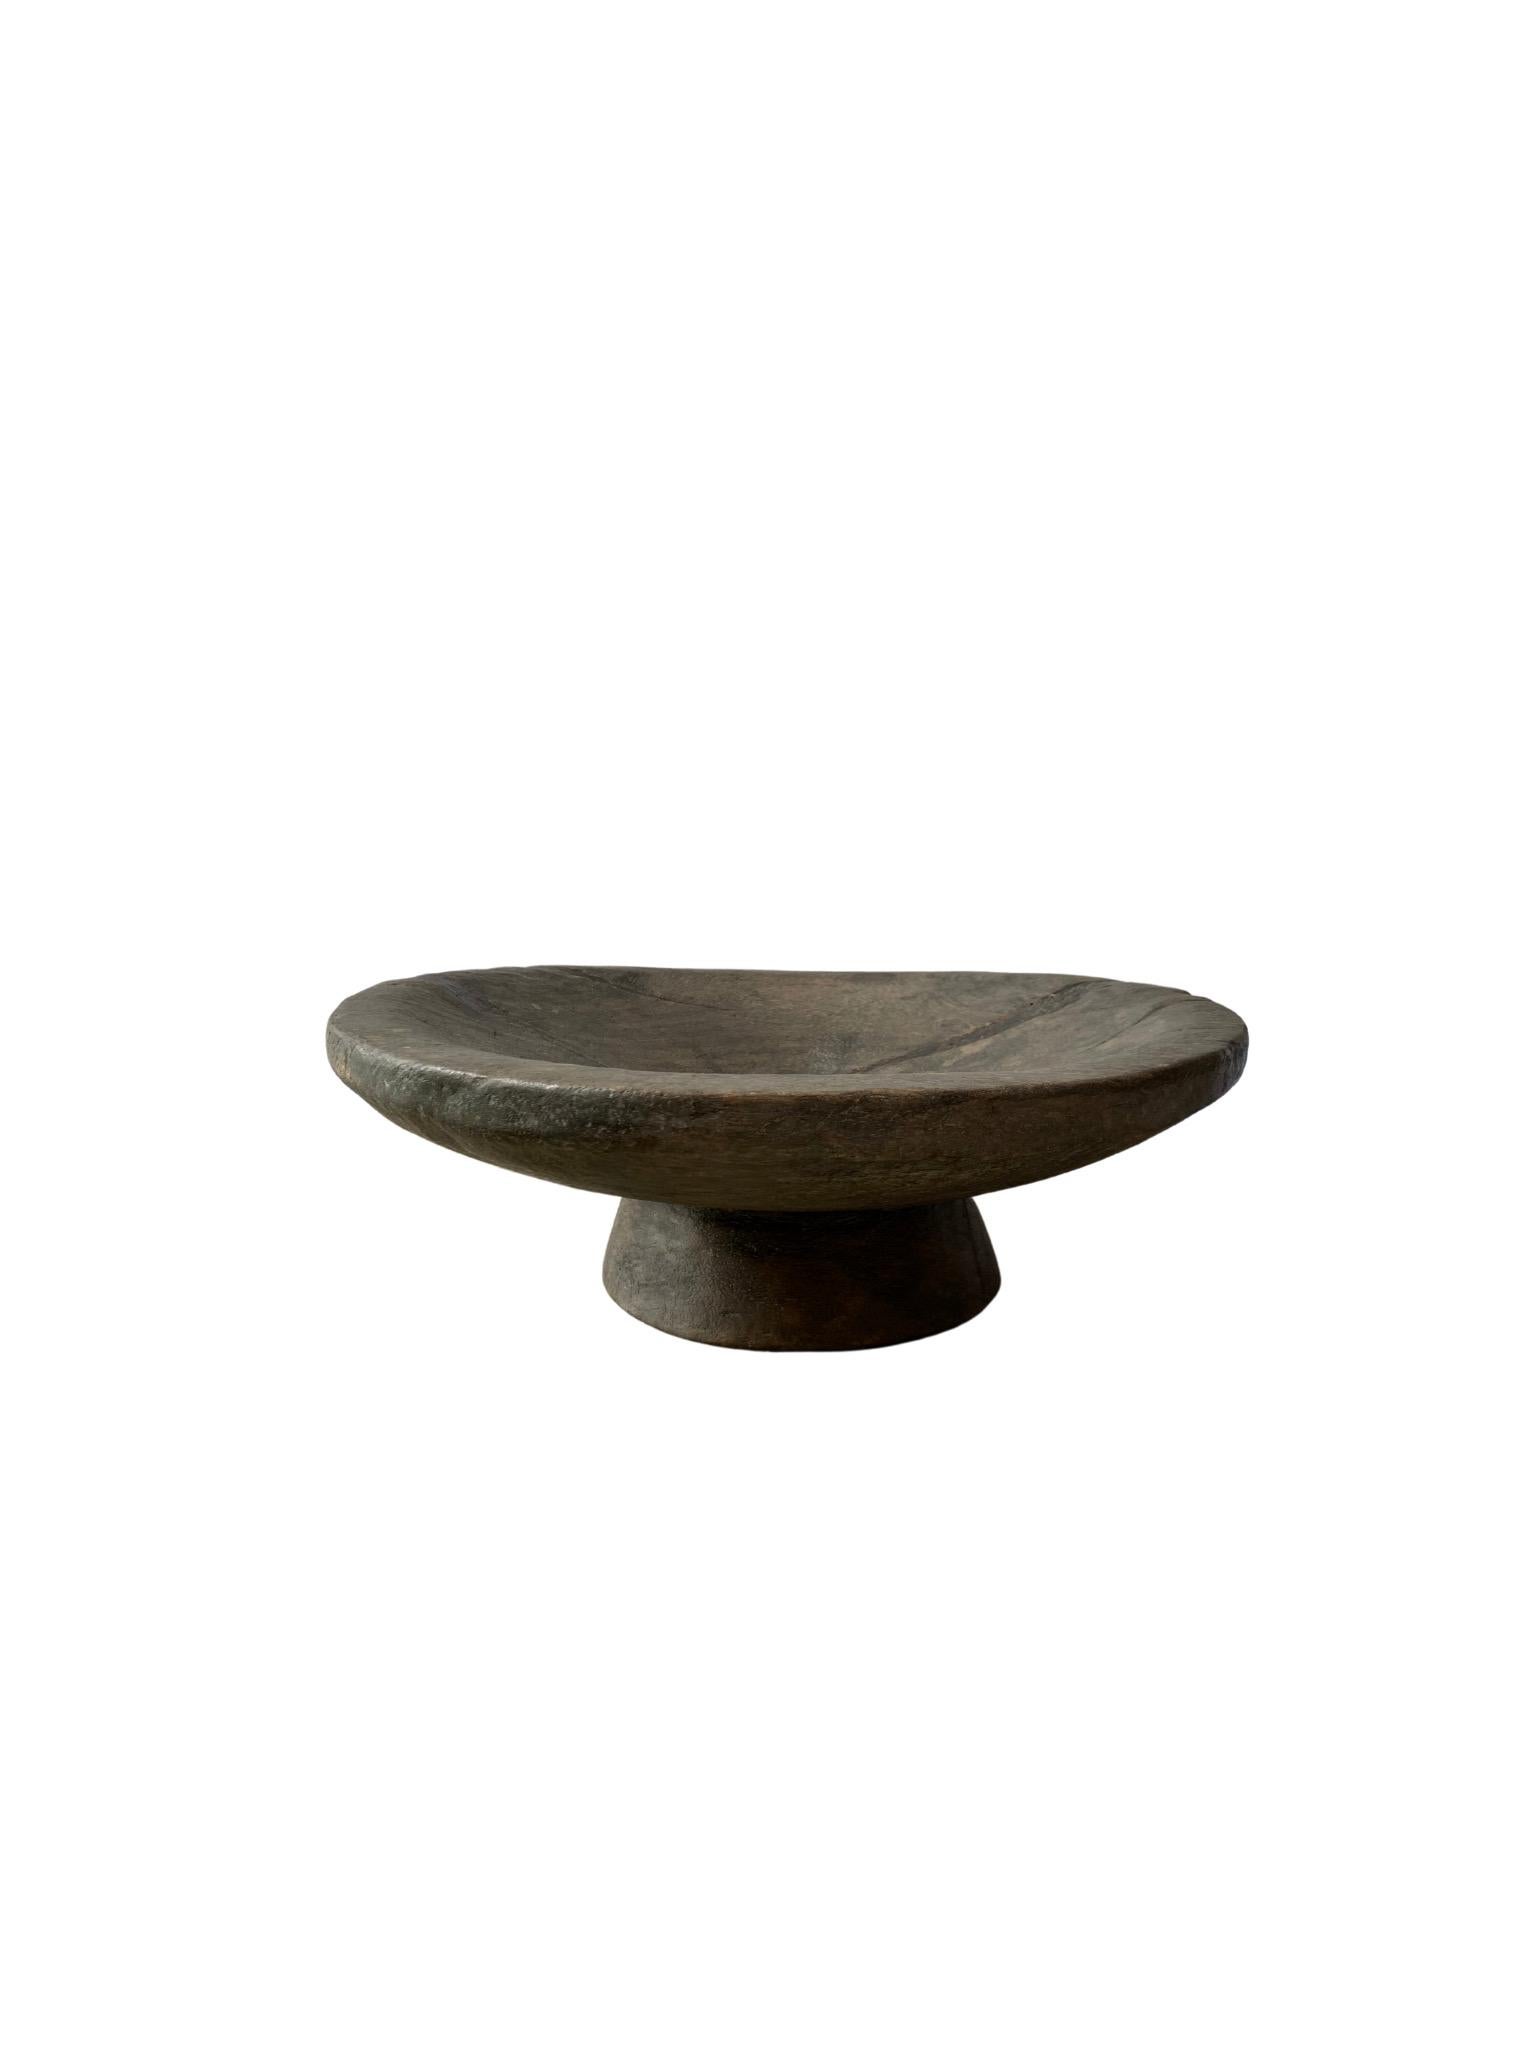 Indonesian Batak Tribe Ceremonial Bowl from Jackfruit Wood, Early 20th Century For Sale